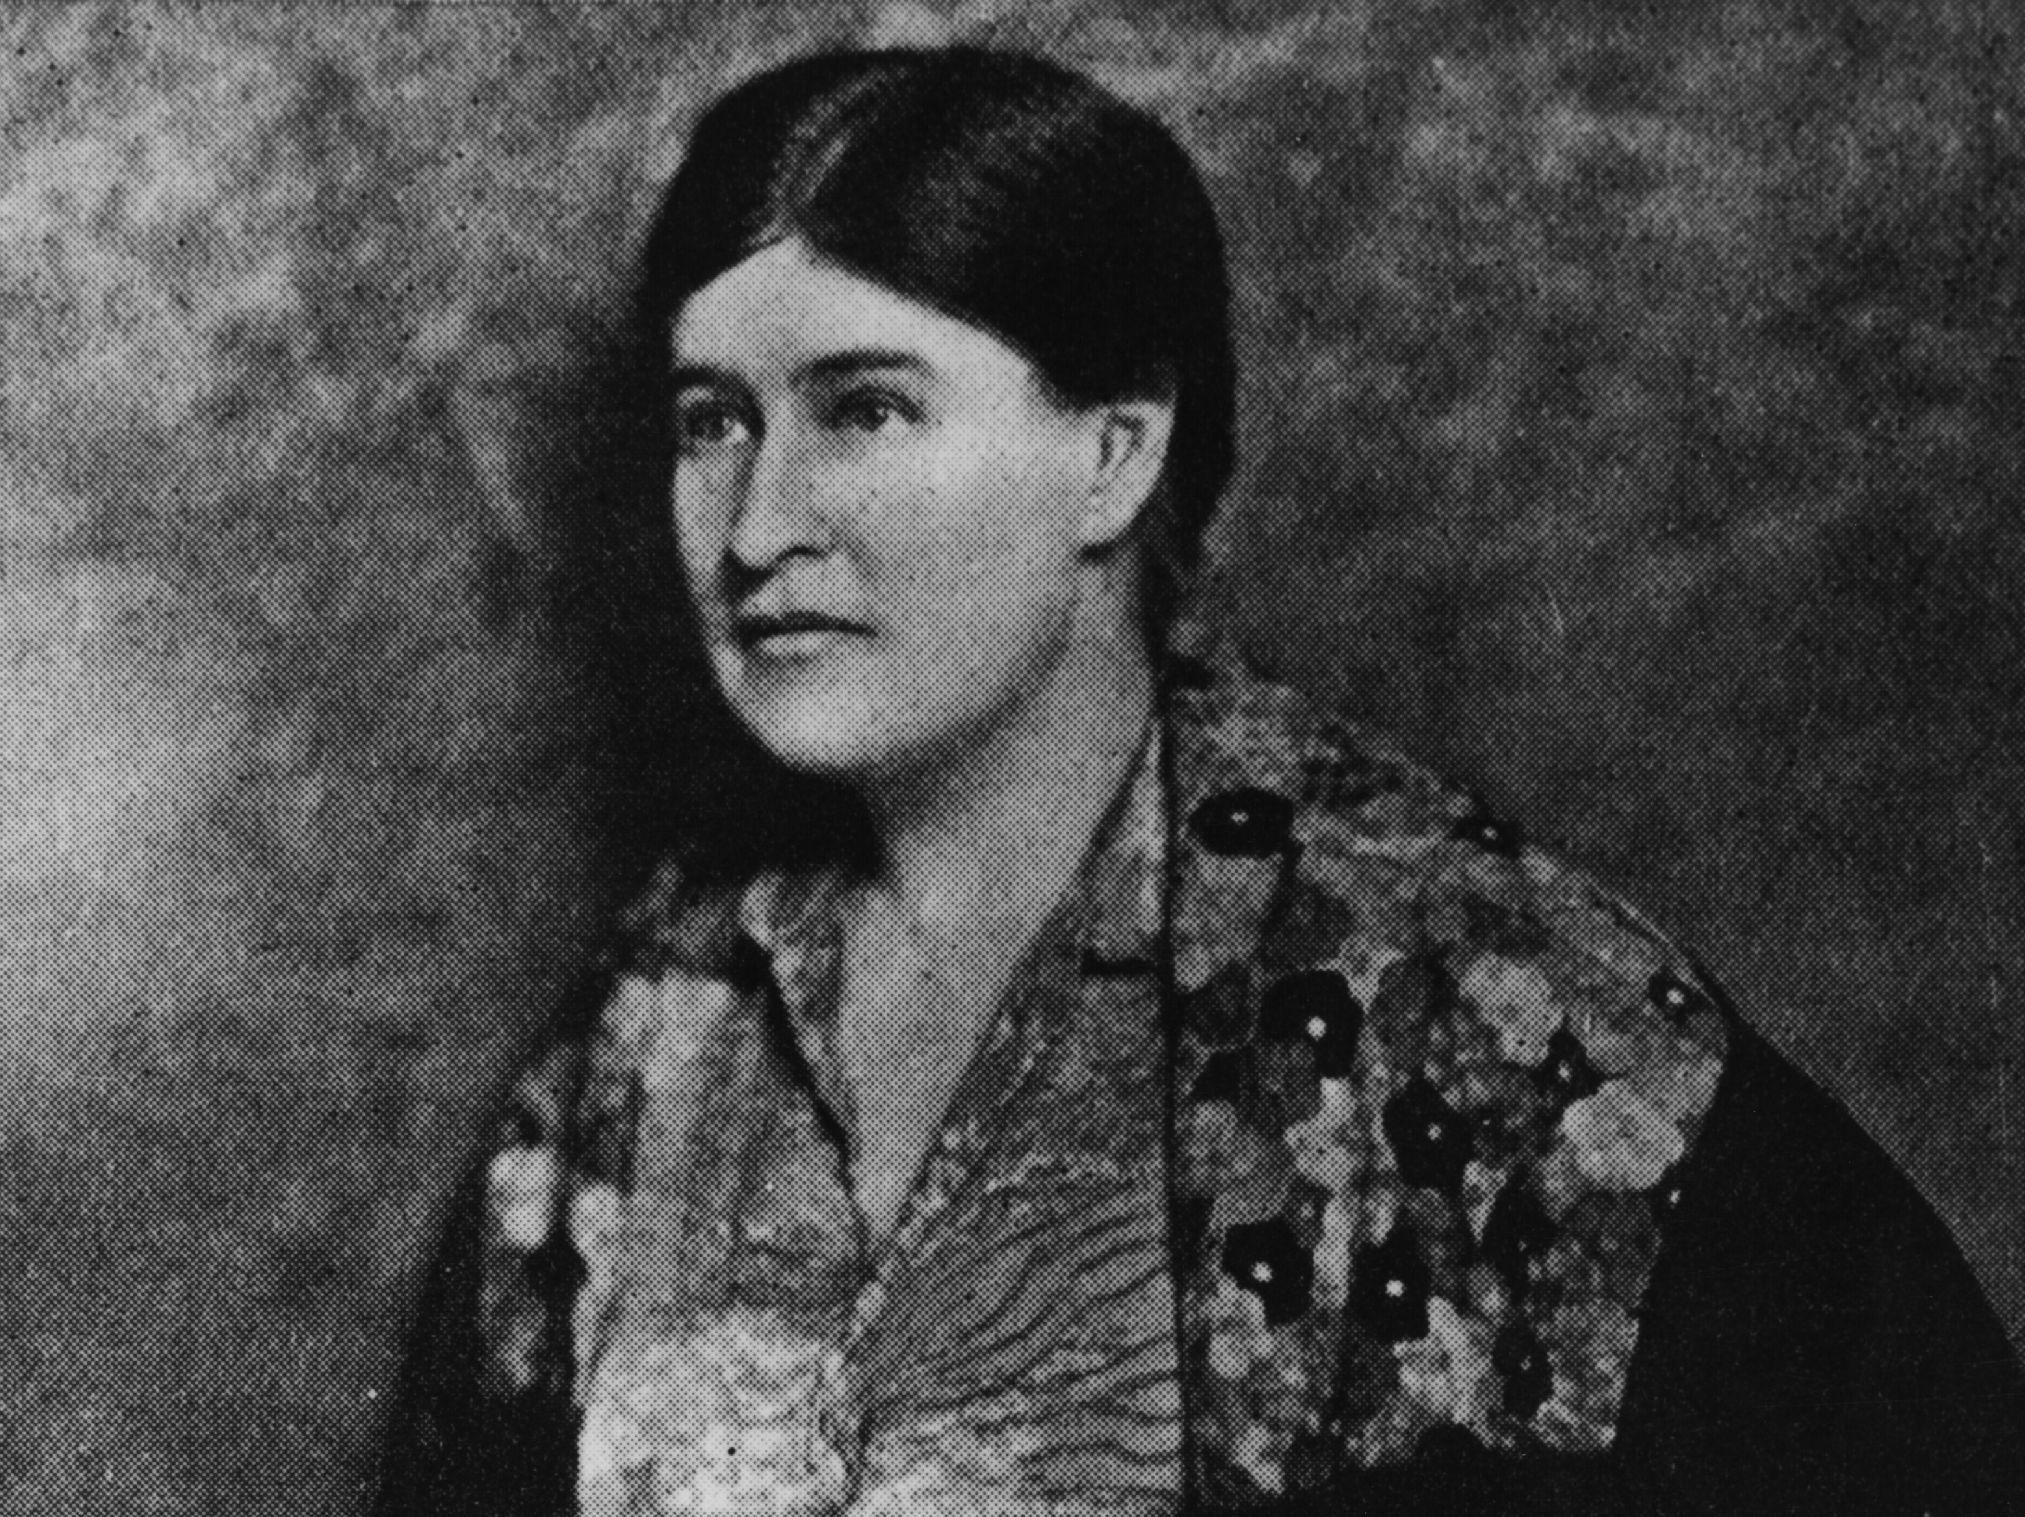 Willa cather writing style